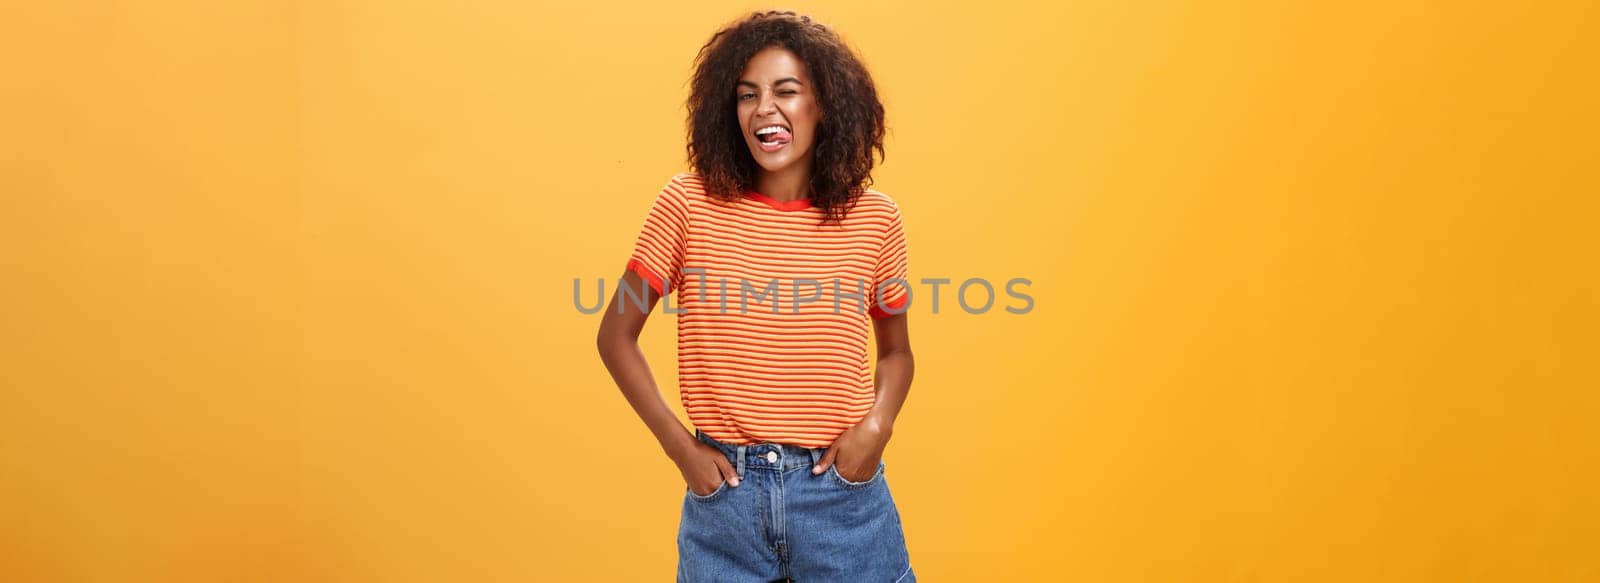 Woman sometimes wants feel childish. Joyful enthusiastic and charismatic young african american female with afro hairstyle winking happily showing tongue holding hands in pockets against orange wall.